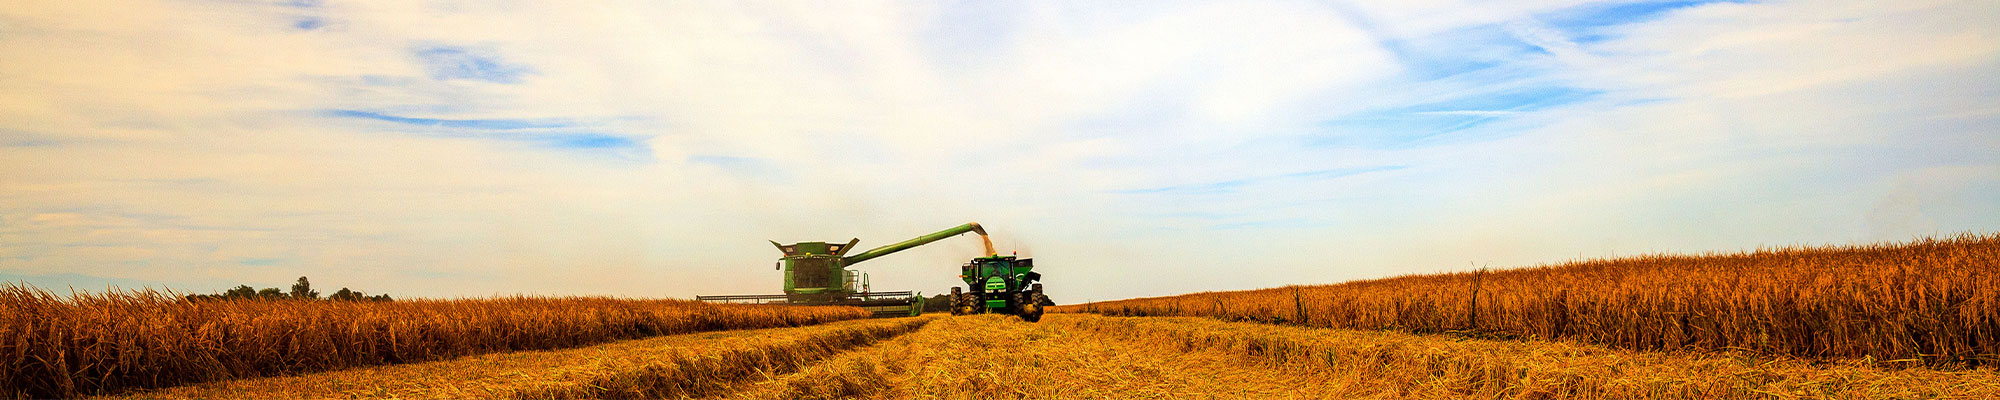 Image of a green combine harvesting rice.